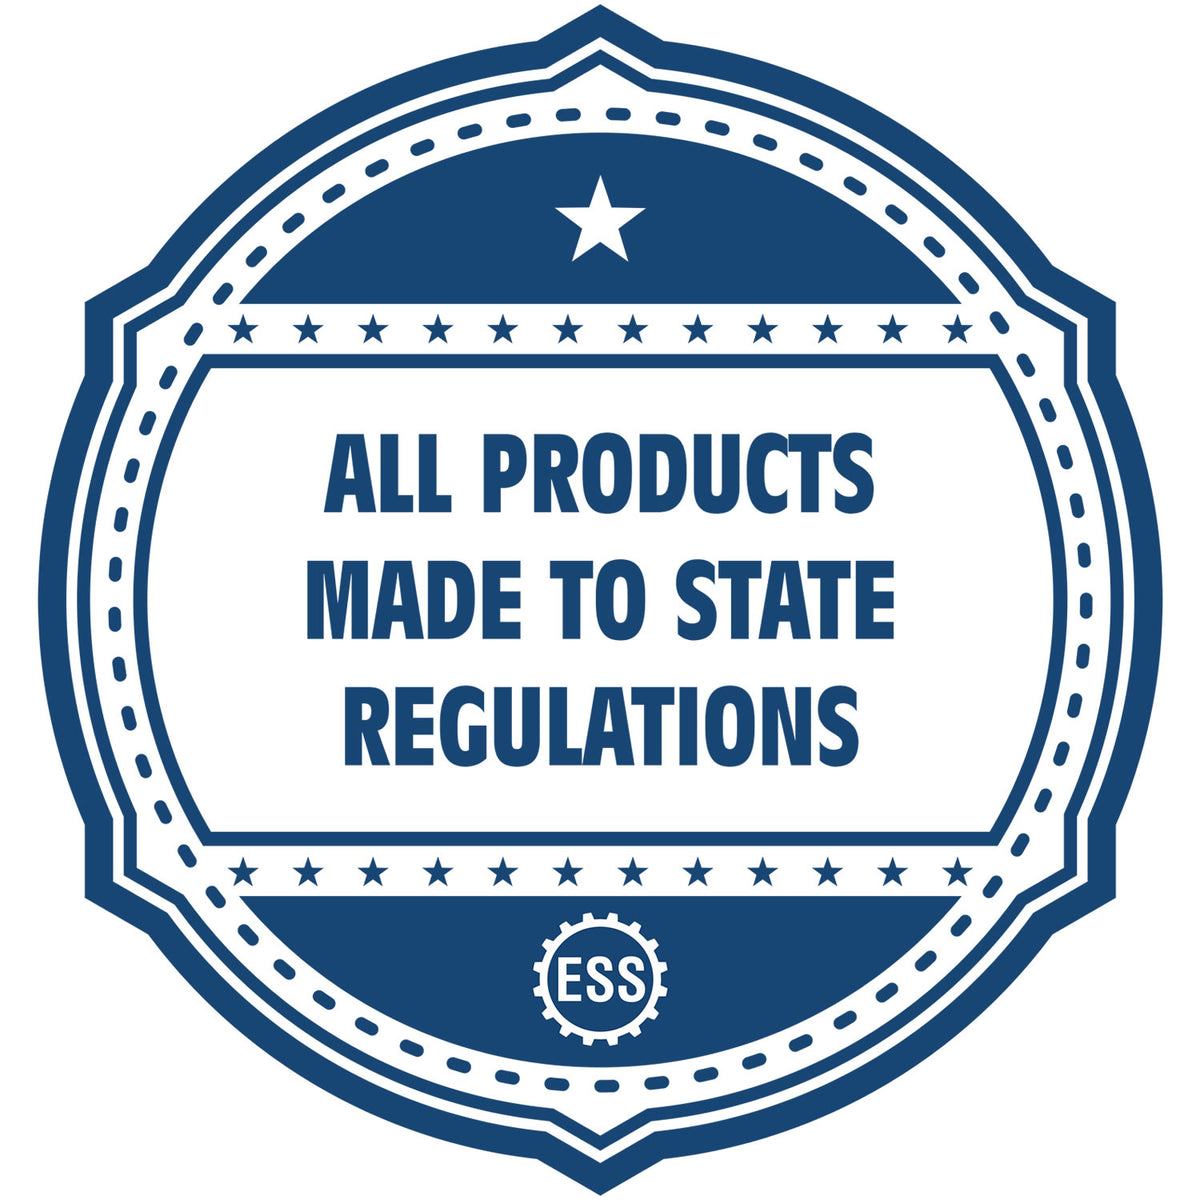 An icon or badge element for the Super Slim New Jersey Notary Public Stamp showing that this product is made in compliance with state regulations.